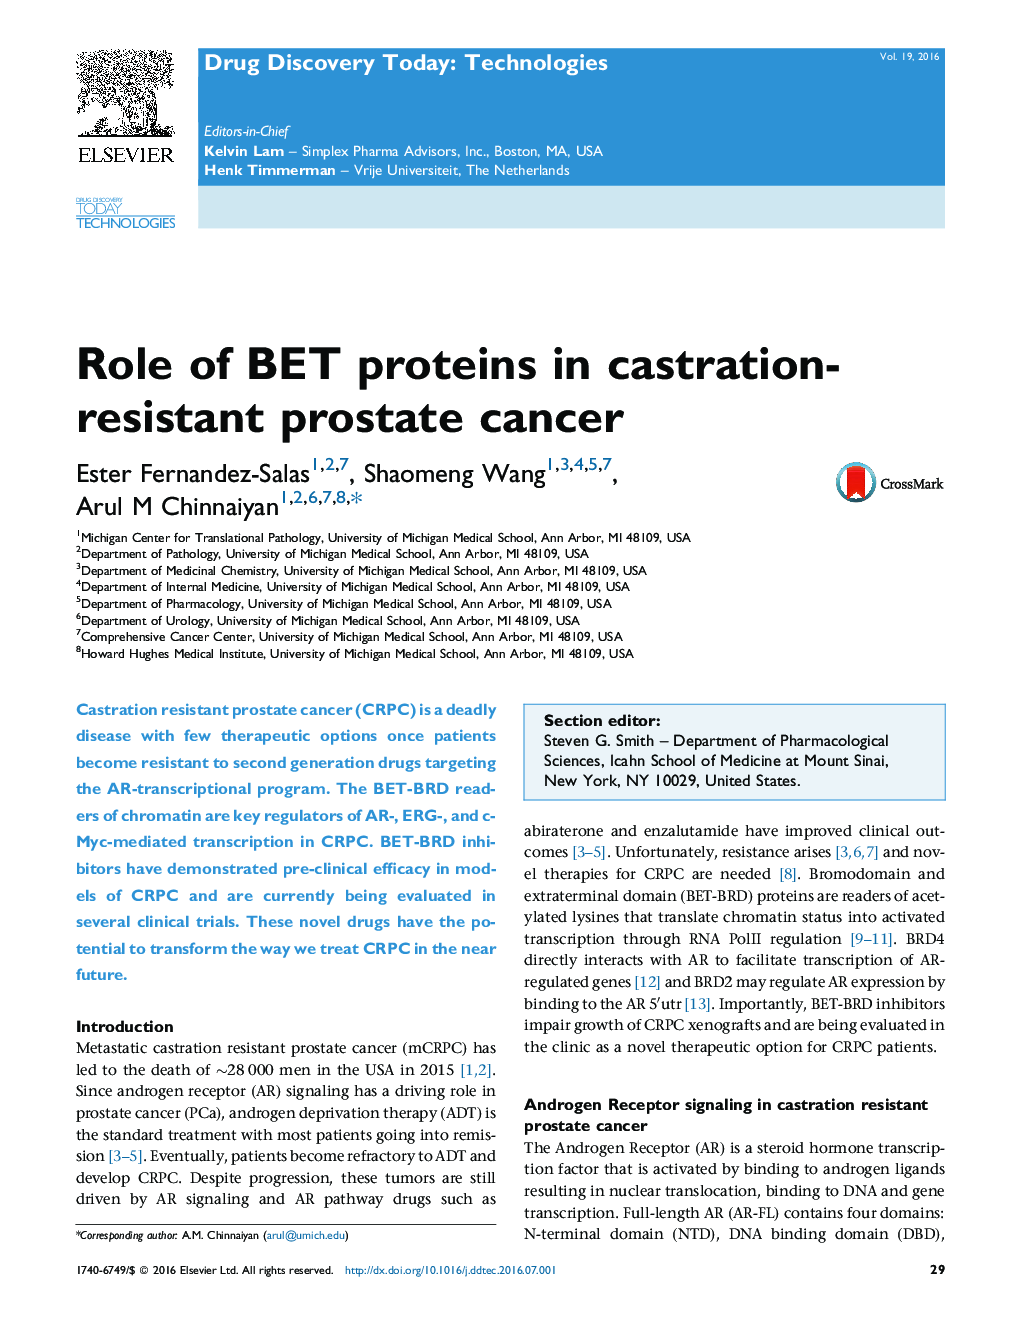 Role of BET proteins in castration-resistant prostate cancer